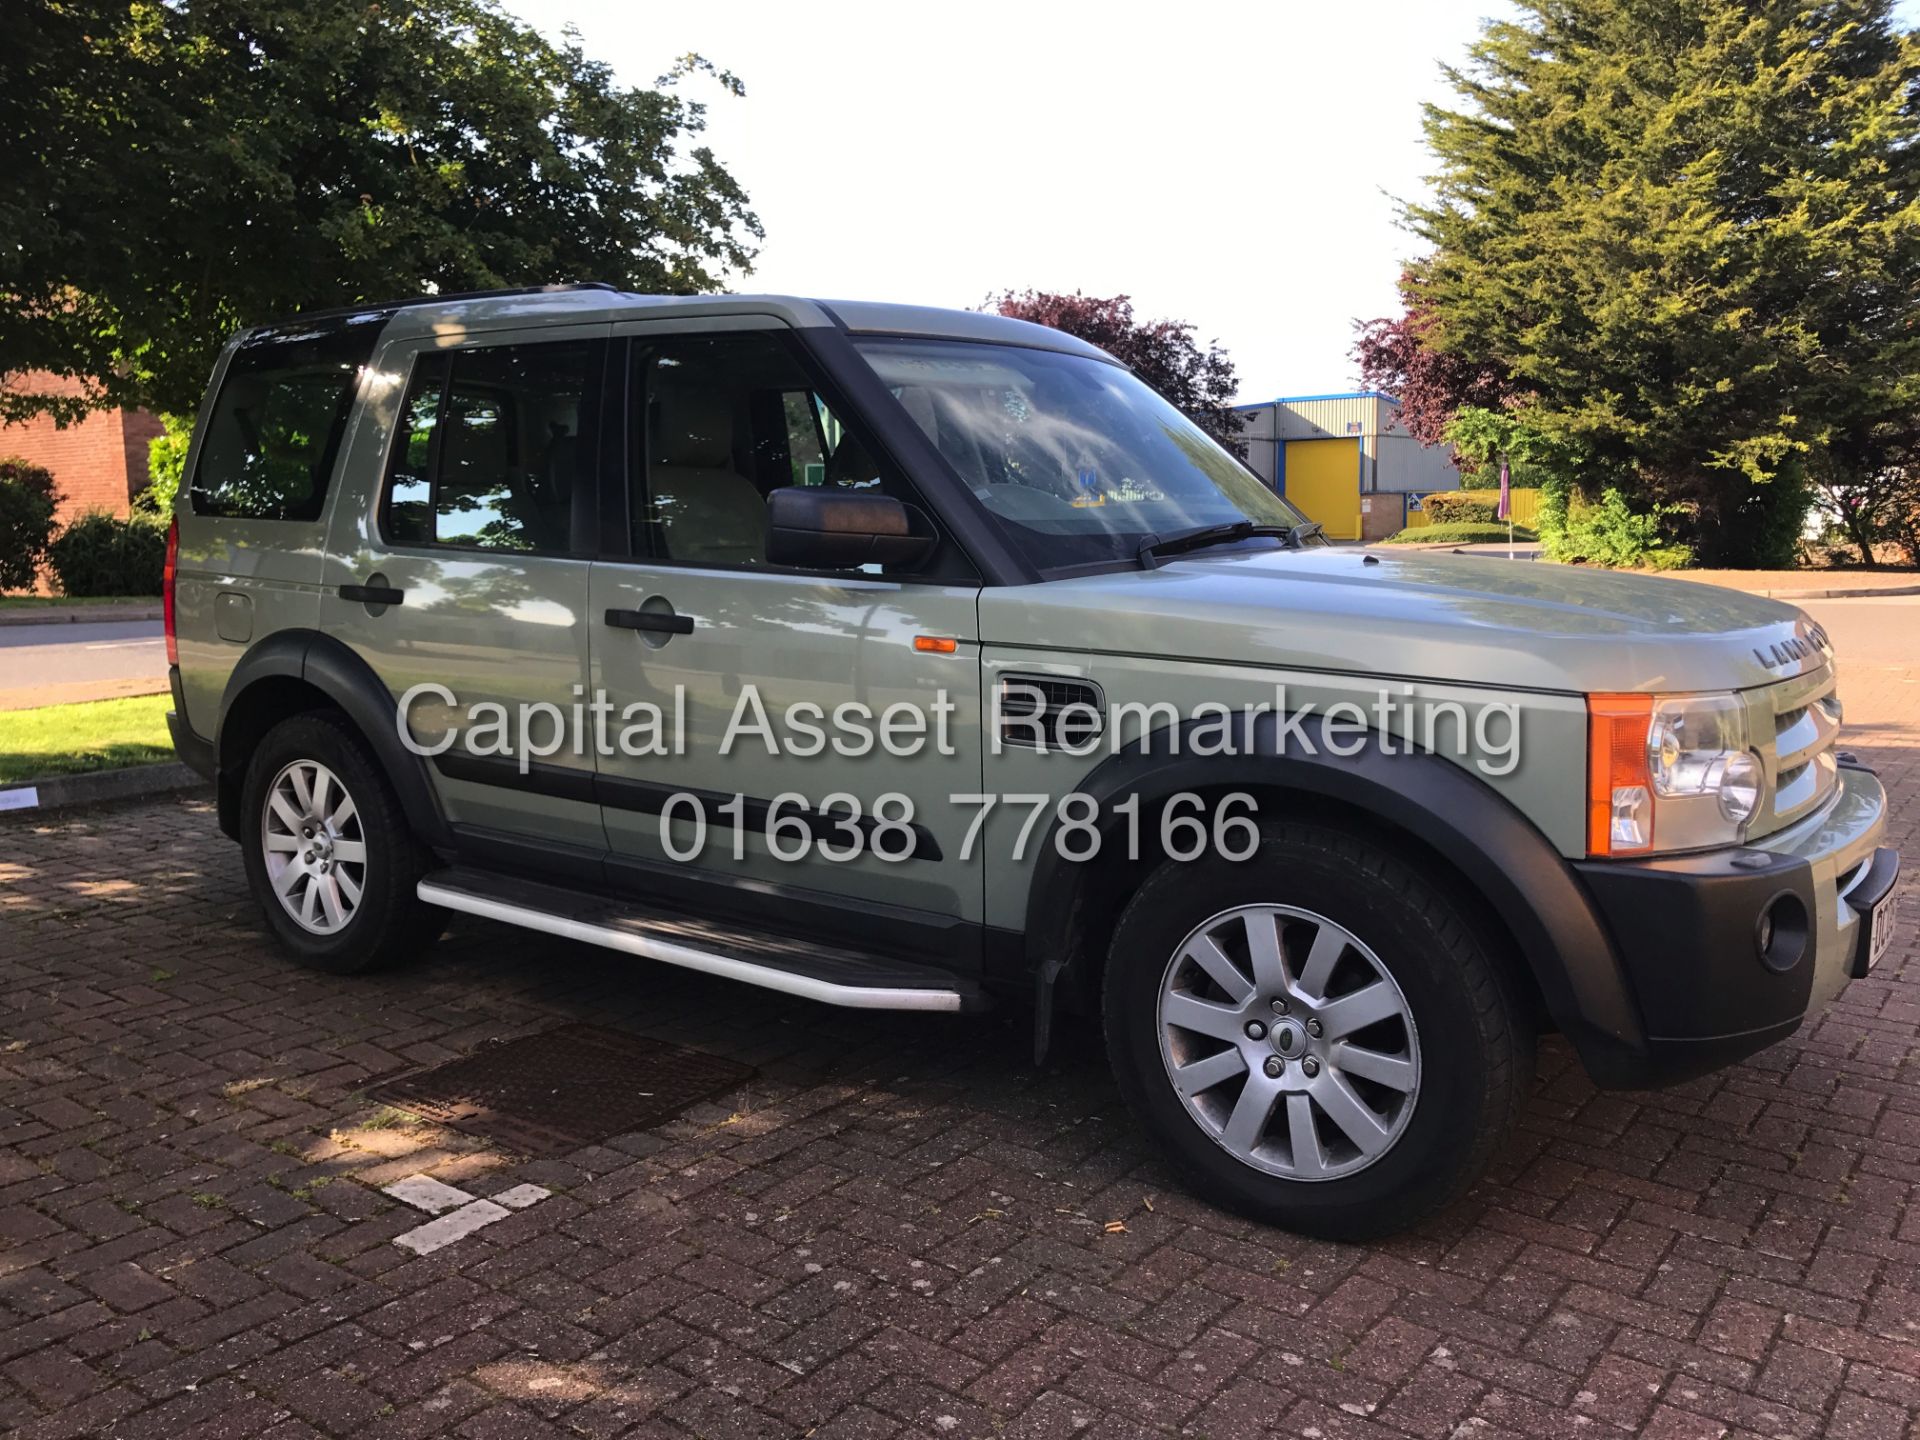 (ON SALE) LAND ROVER DISCOVERY TDV6 "SE 7 SEATER" GREAT SPEC - SAT NAV - FULL LEATHER - NO VAT